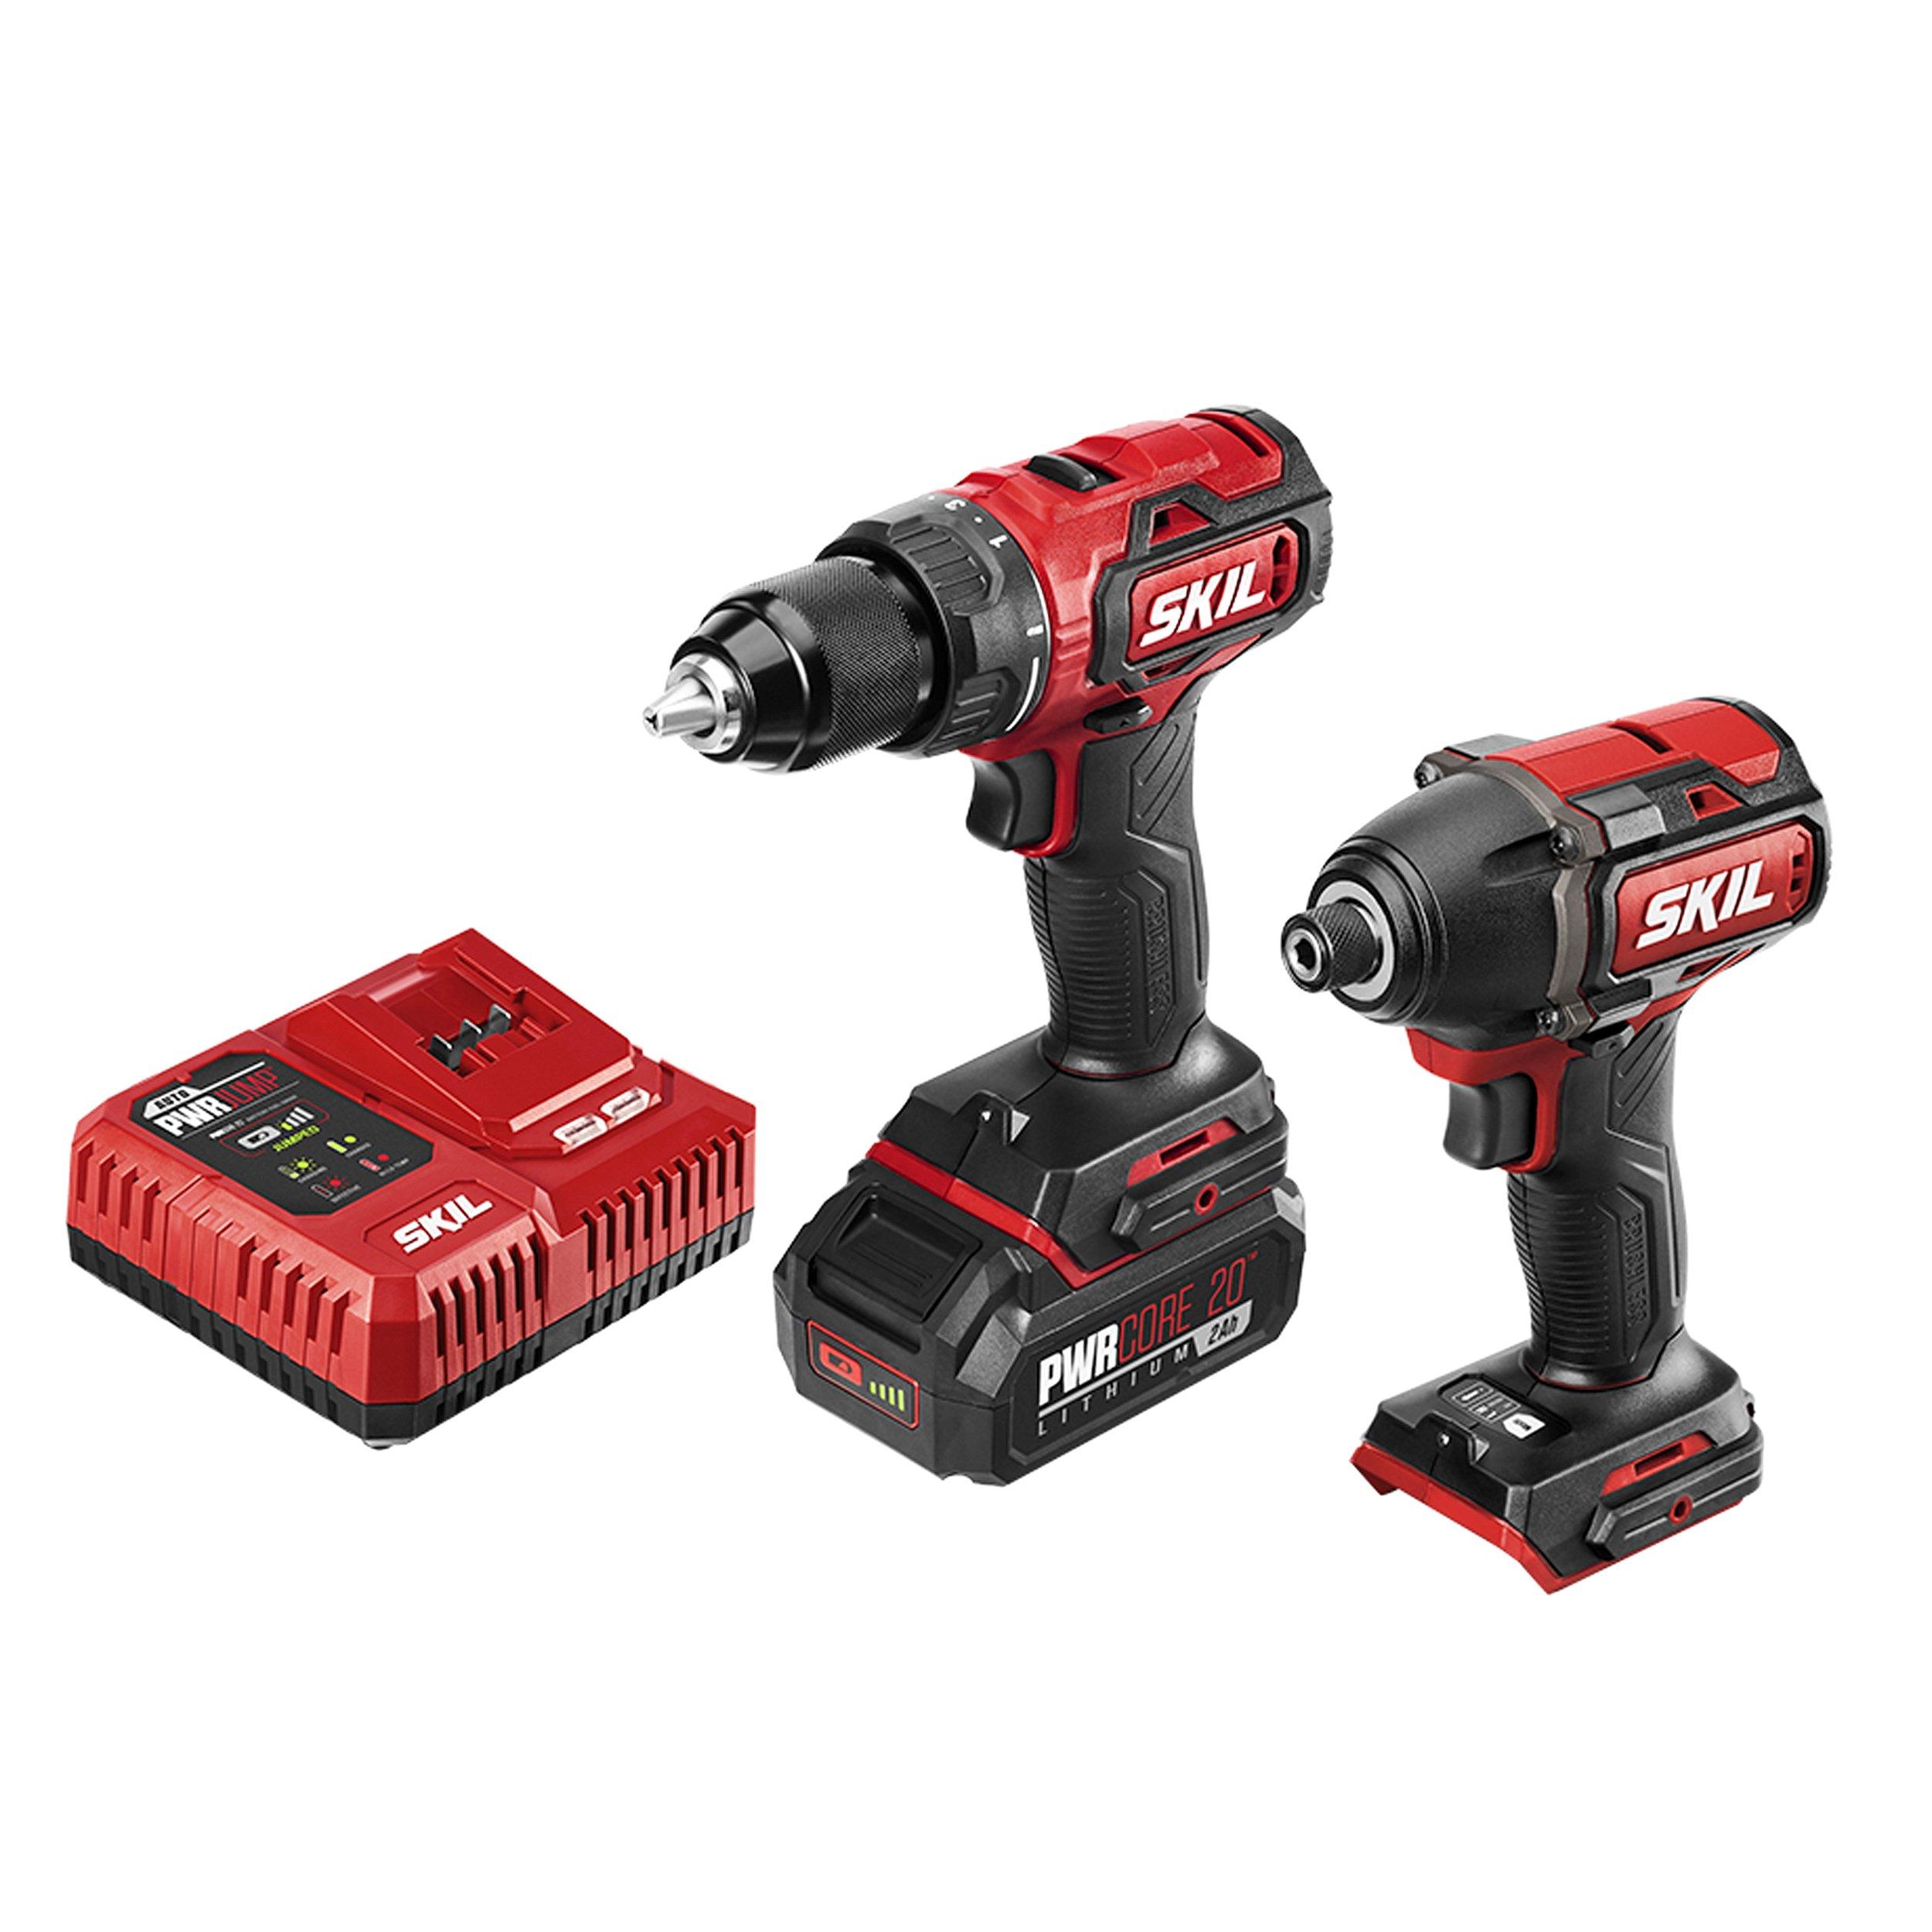 Skil PWR CORE 20 2-Tool Power Drill and Impact Driver Combo